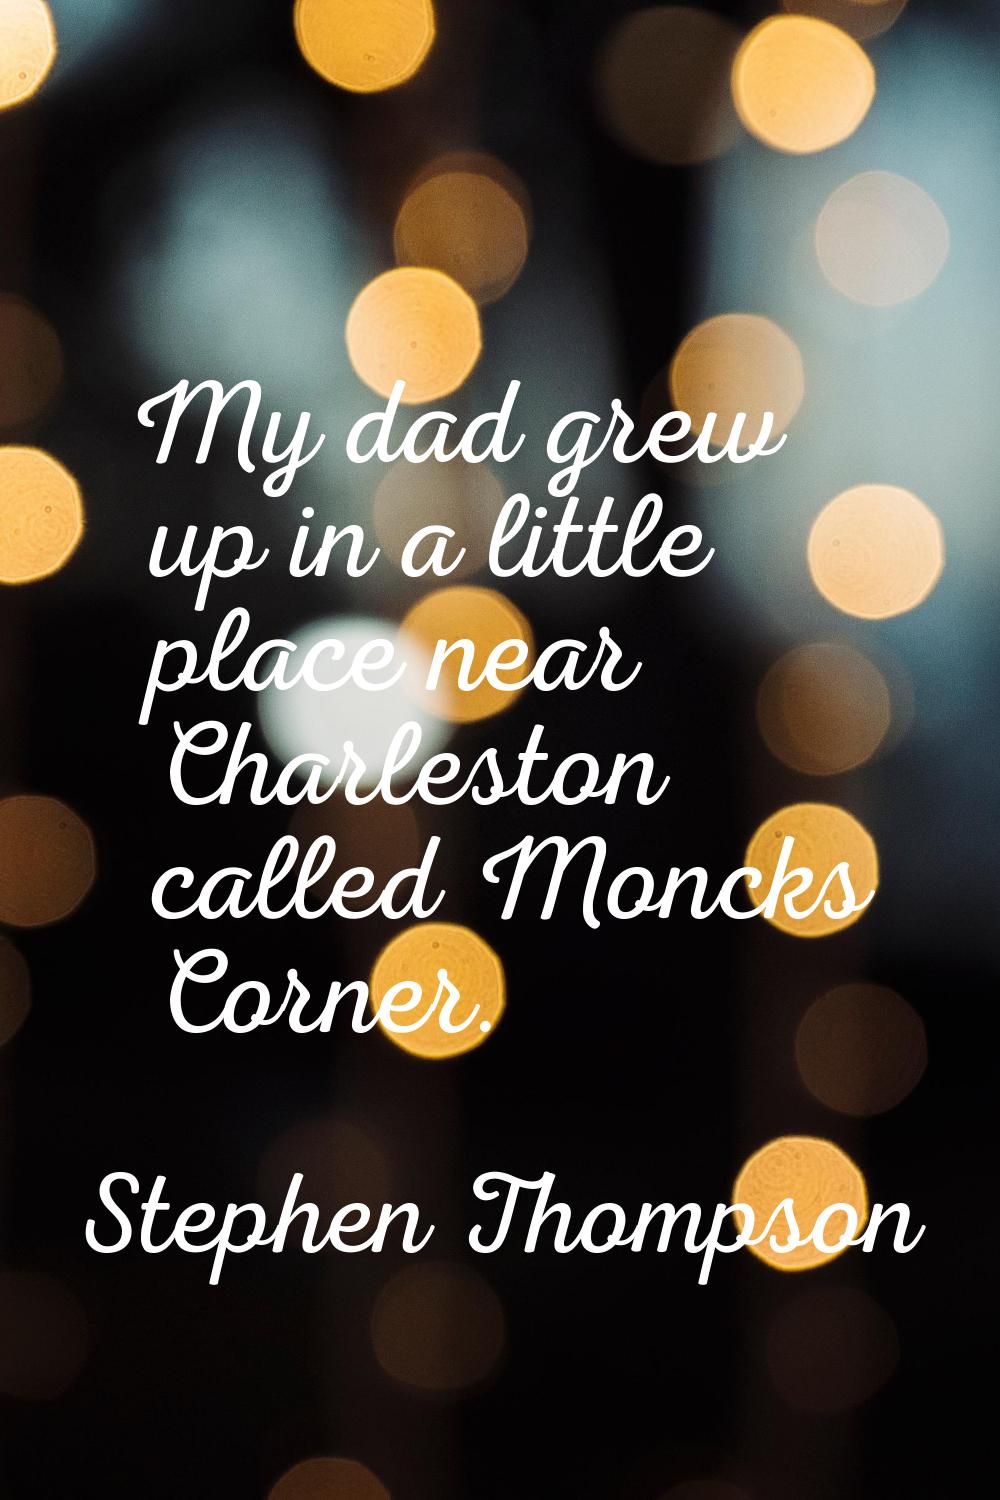 My dad grew up in a little place near Charleston called Moncks Corner.